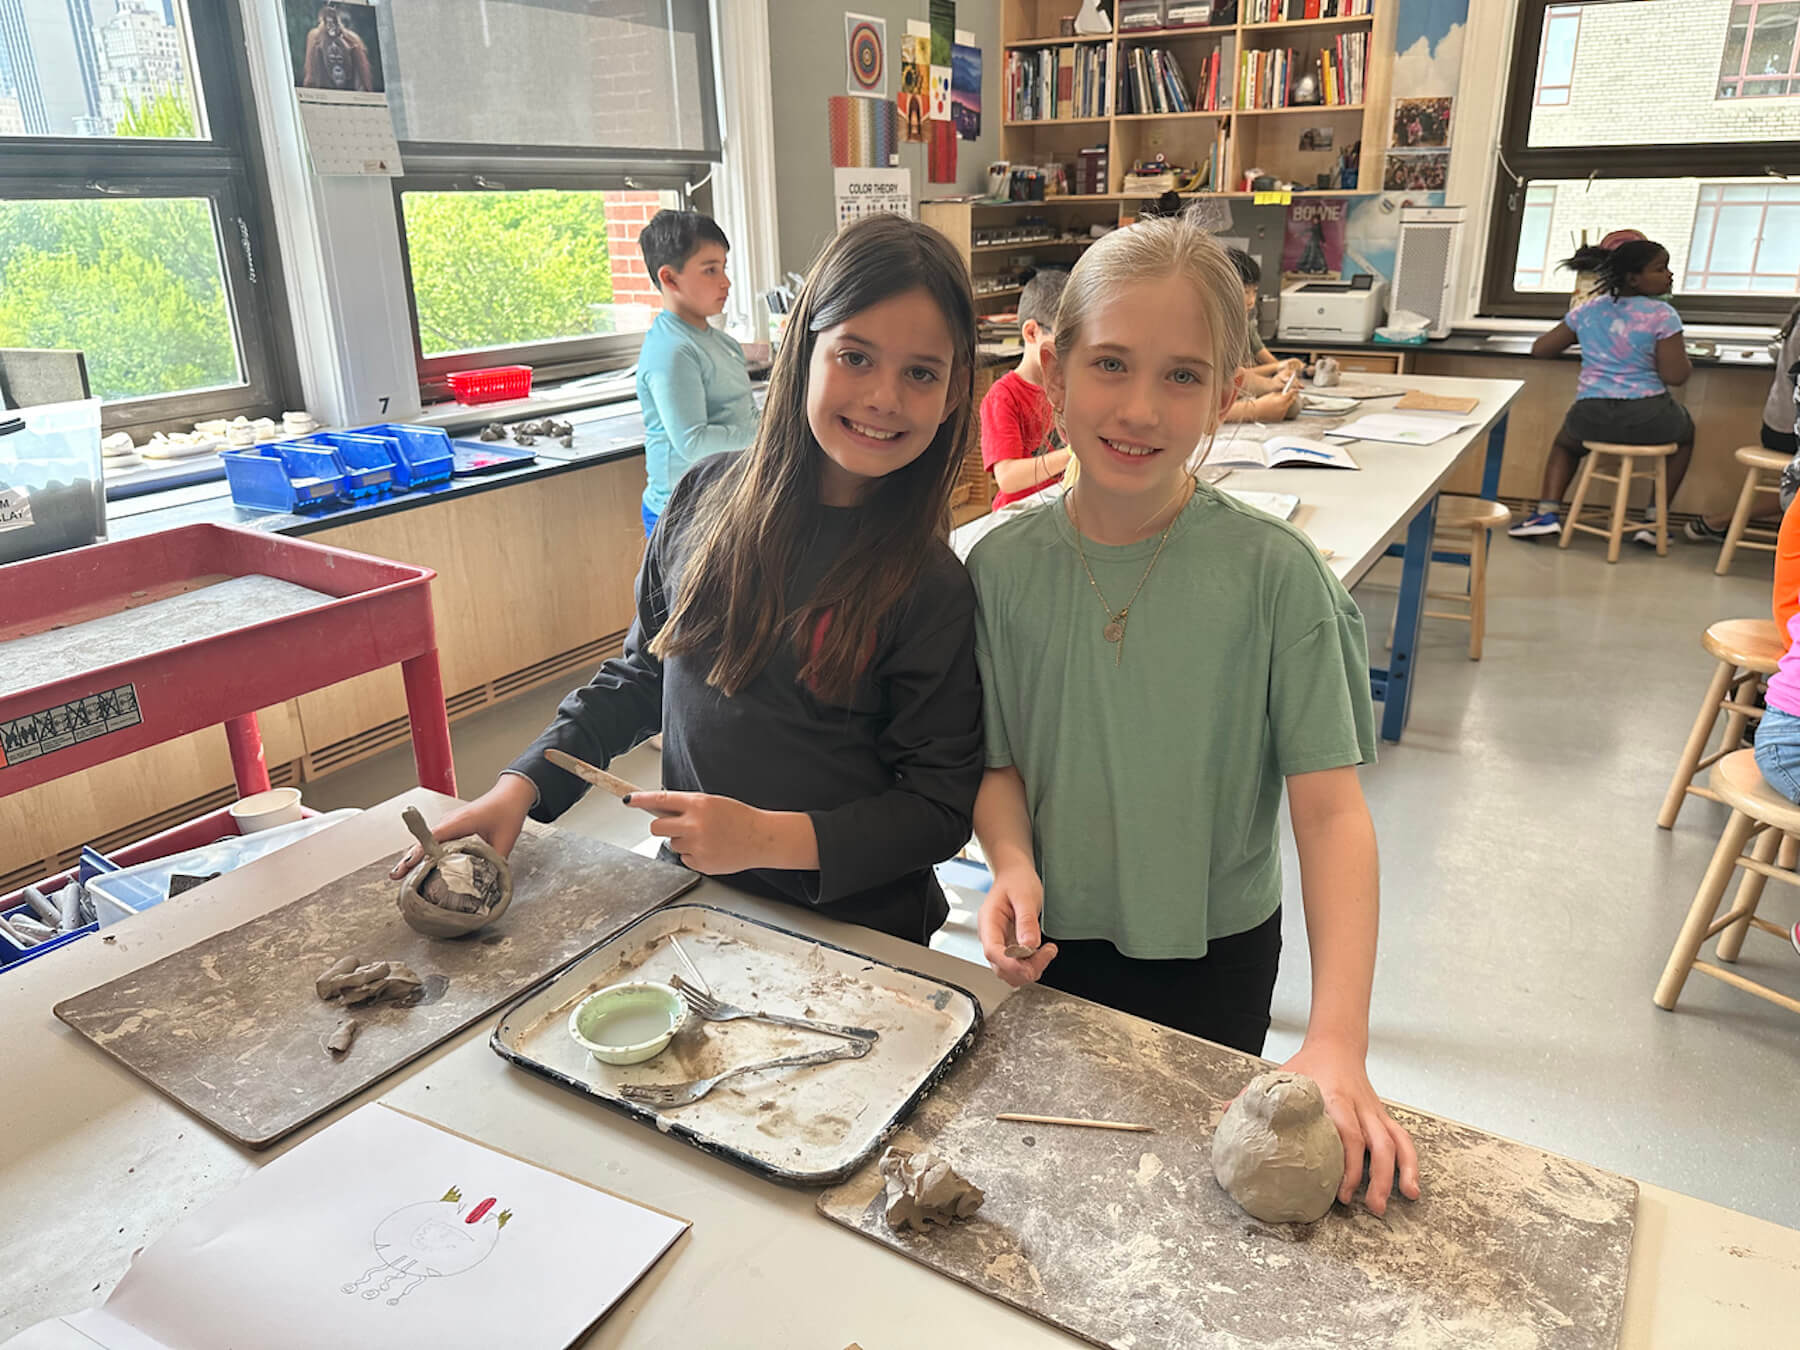 Ethical Culture 2nd Grade students pose and smile with their ceramics projects in art classroom.